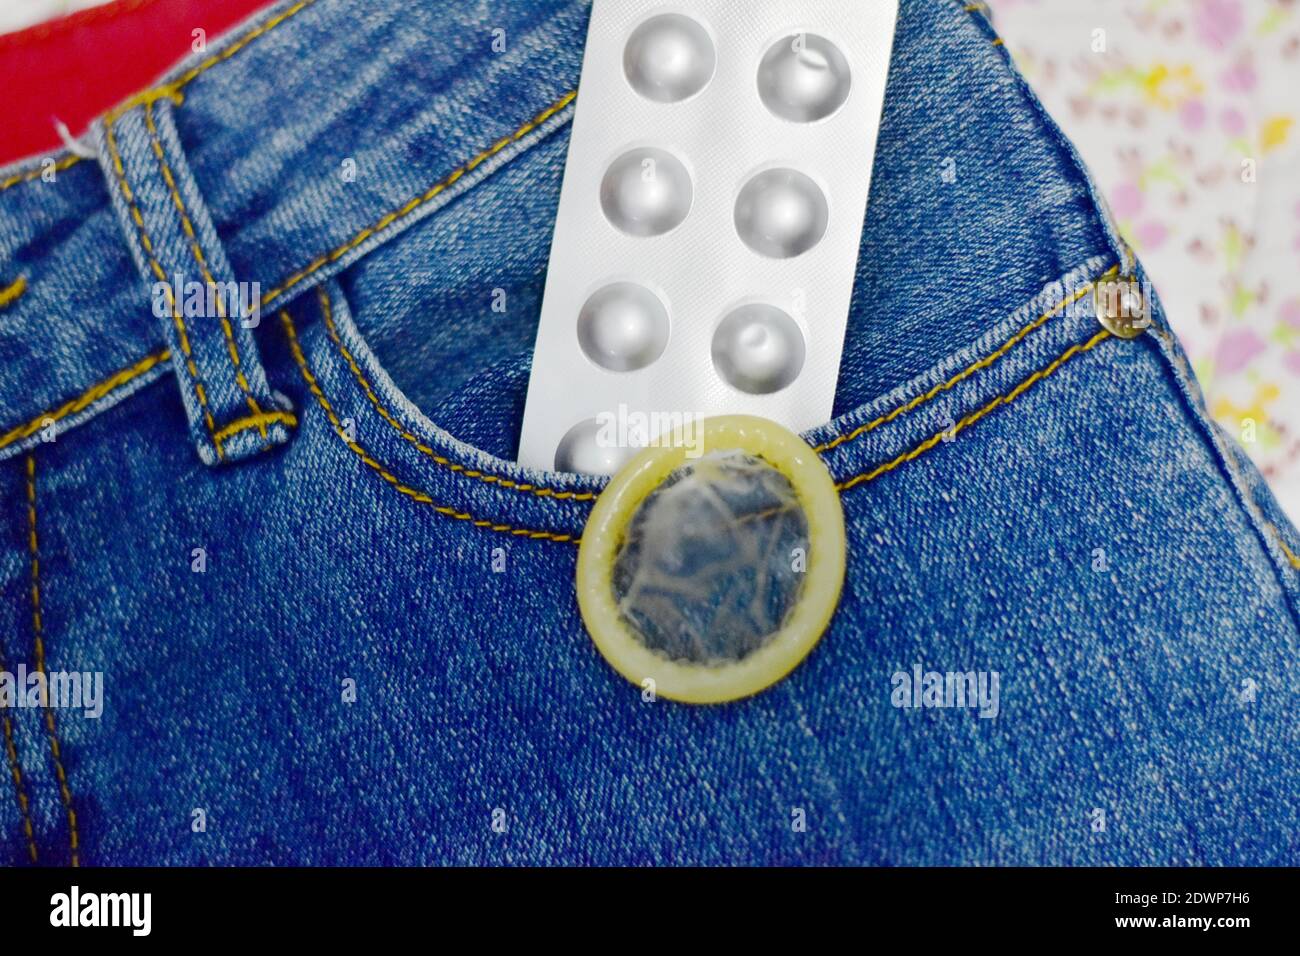 Close-up Of Condom And Blister Pack On Jeans Stock Photo - Alamy